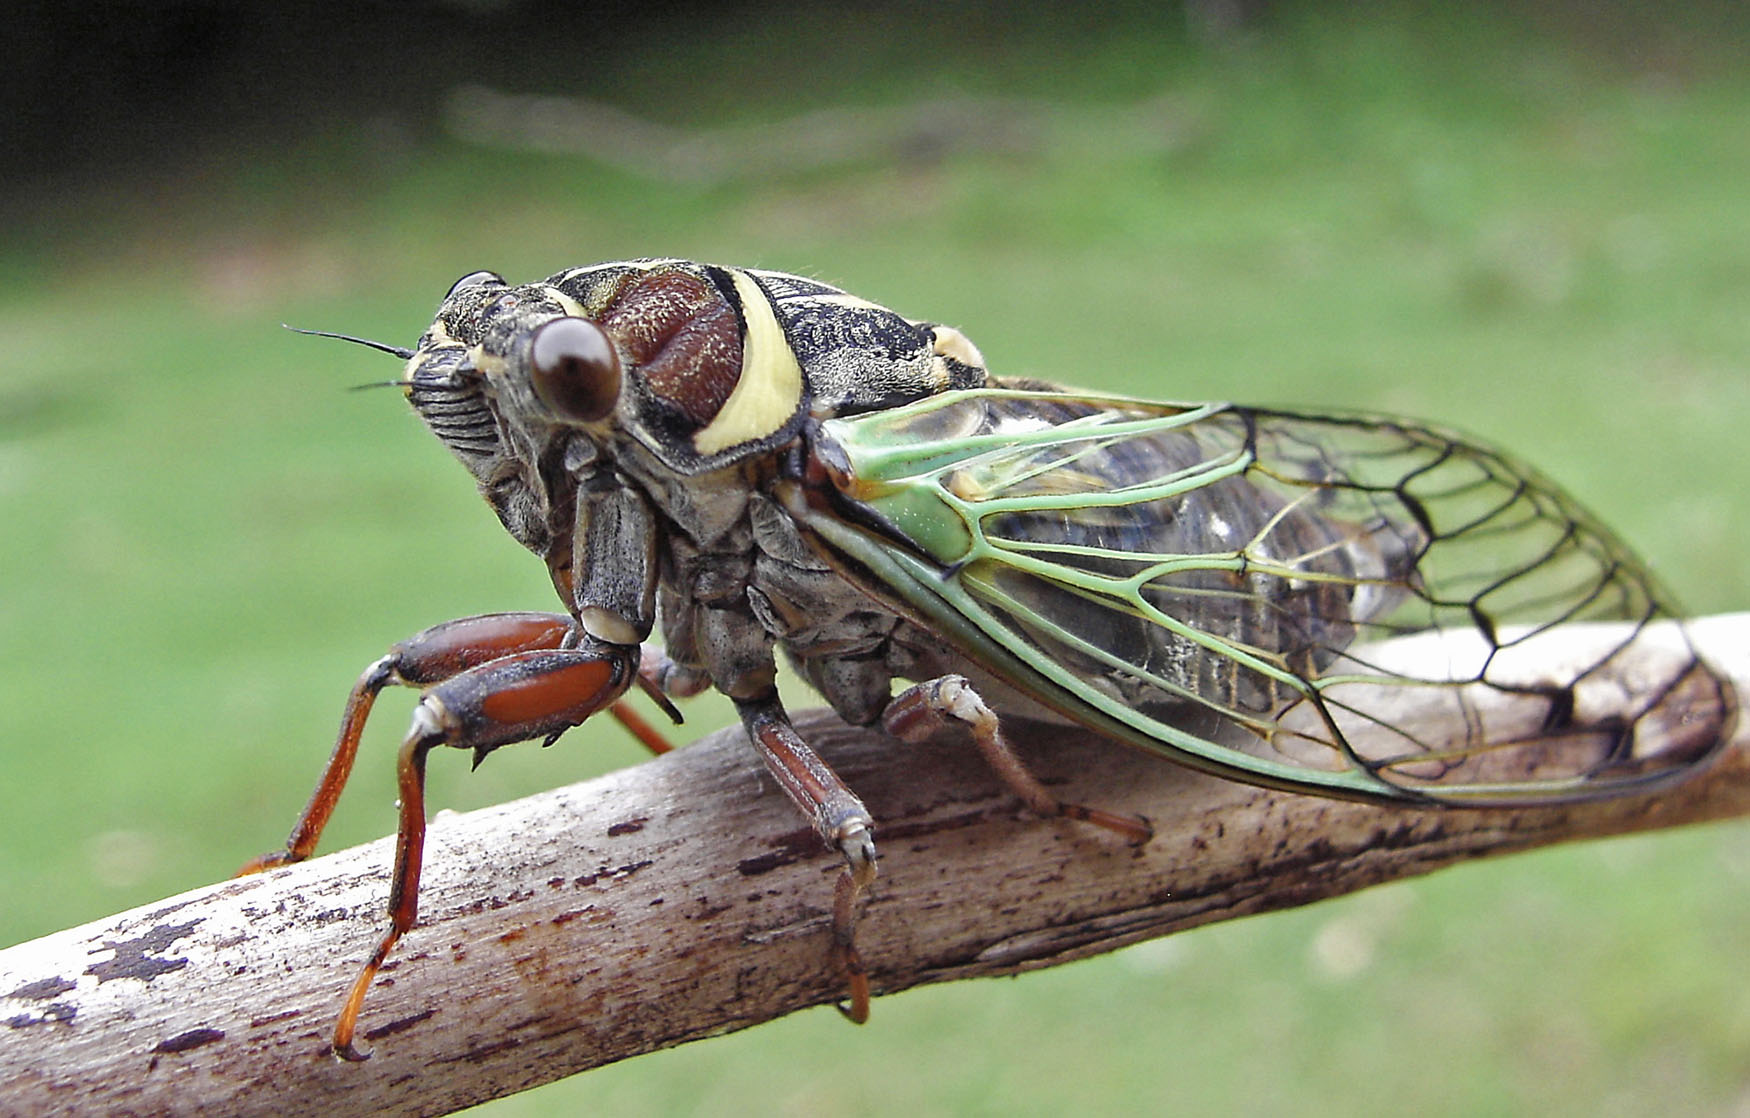 2024 cicada brood map shows where cicadas will emerge in spring